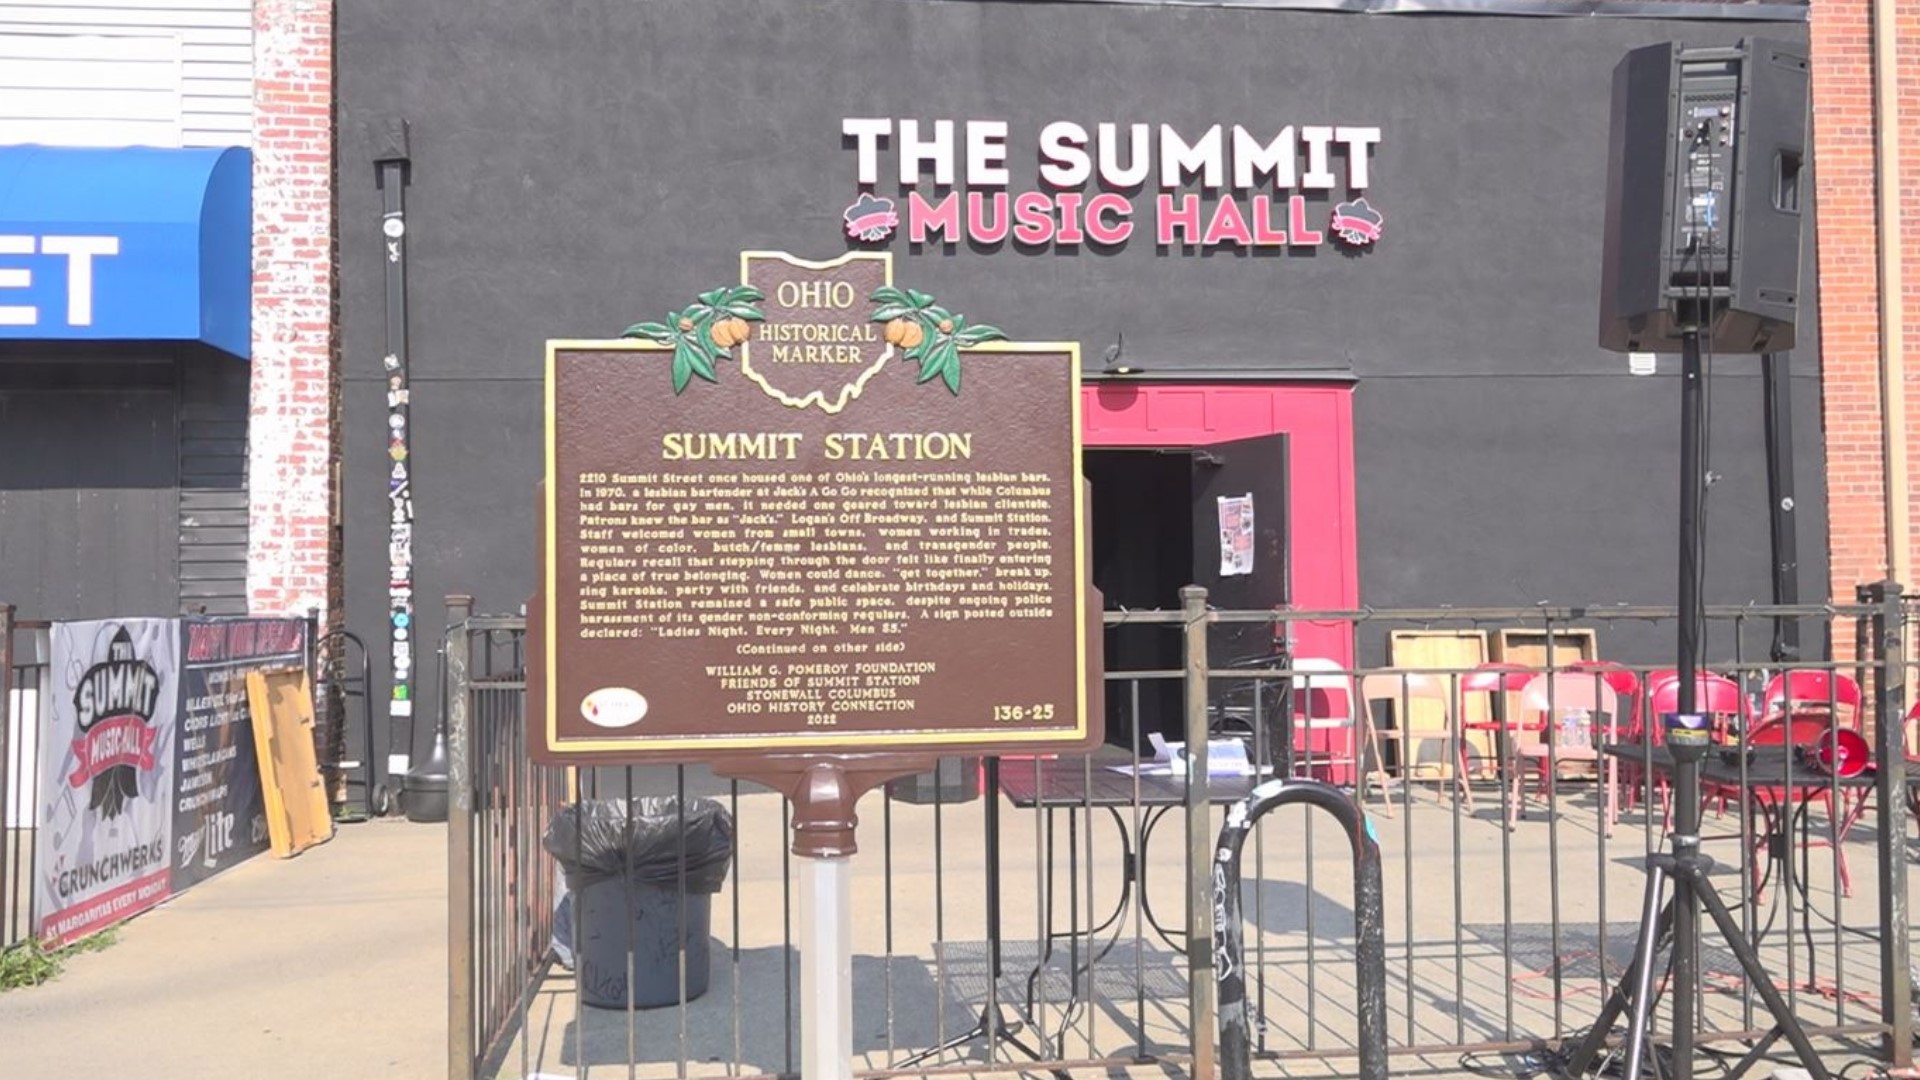 Summit Station, Ohio's first and longest-running lesbian bar, welcomed patrons for nearly four decades before closing in 2008.